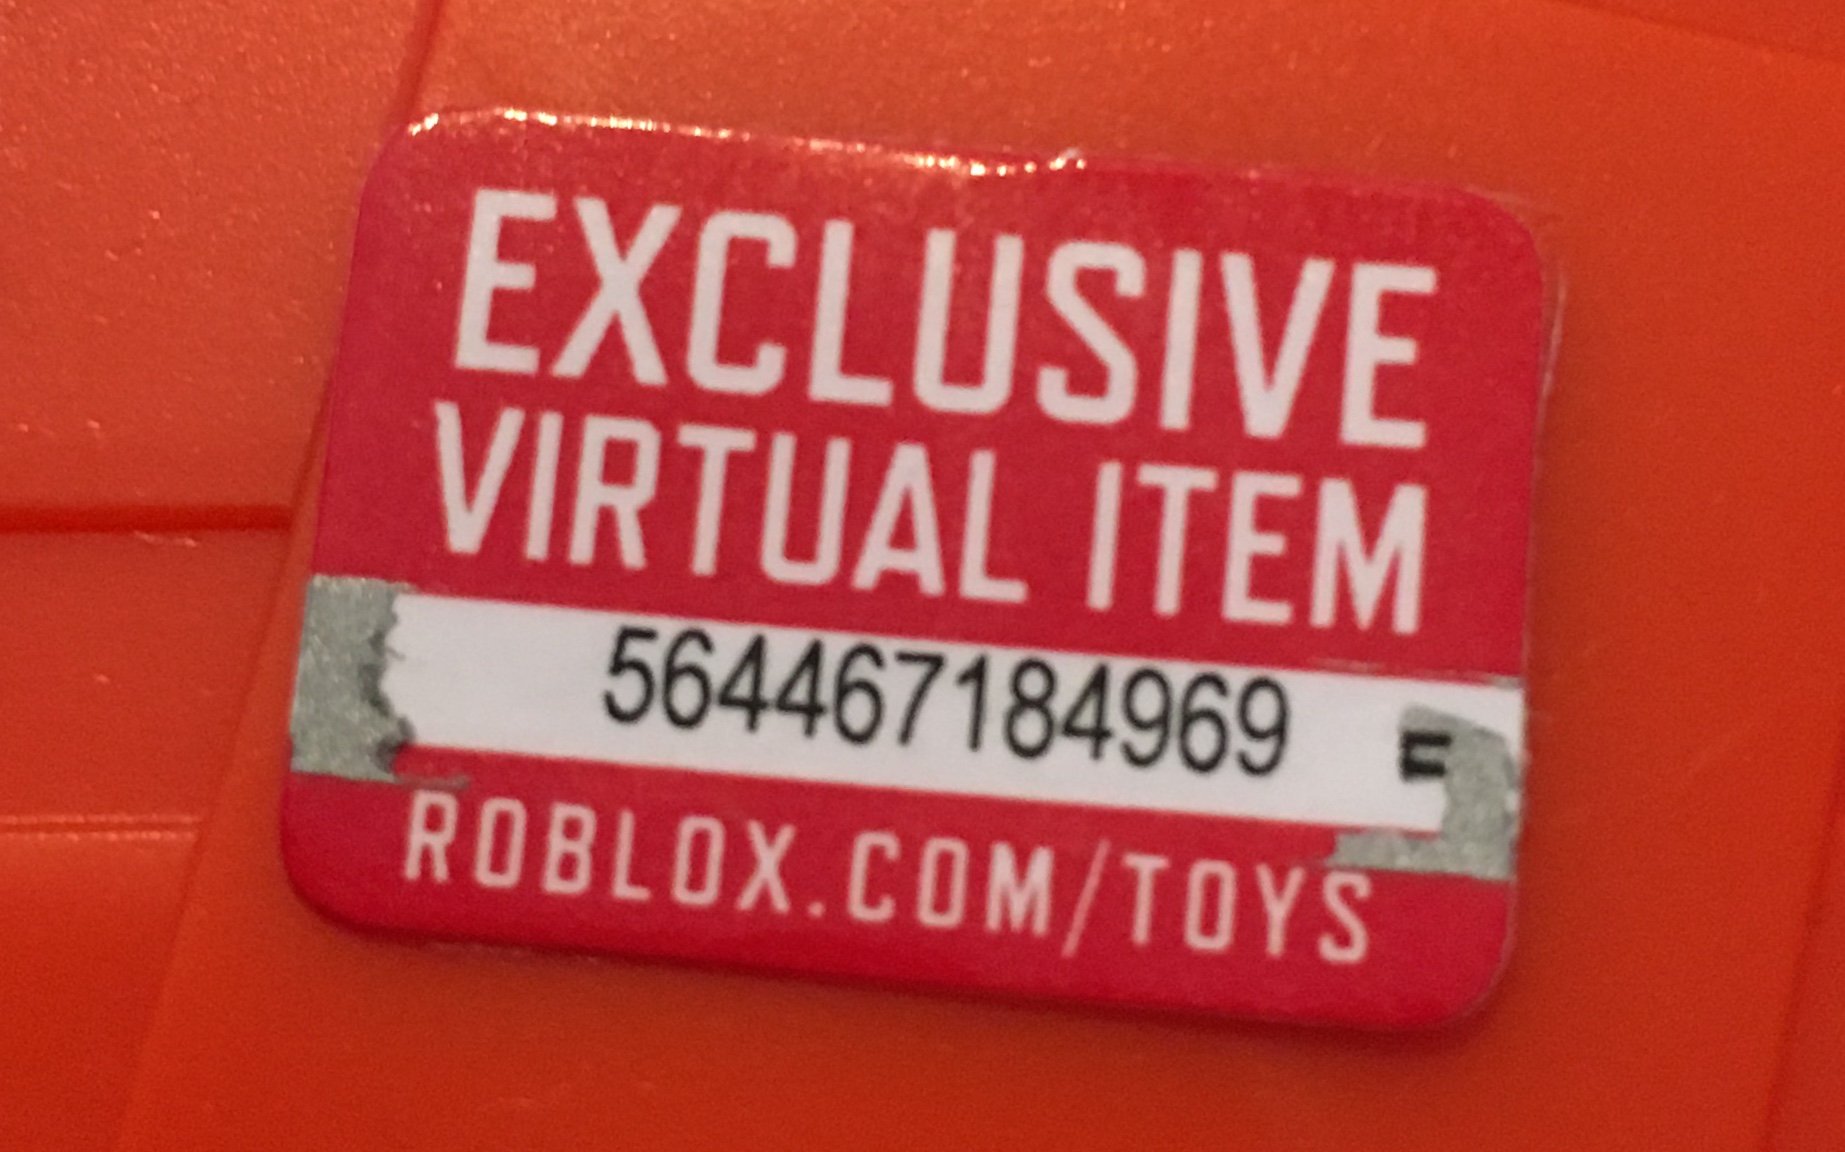 Babymariobebe On Twitter Surprise Toy Code 1 First To Redeem Gets It Code Copy And Paste 564467184969 Redeem Here Https T Co 6vh4t8ggk3 Https T Co Ydmbfpy5wx - htpps www.roblox.com toys